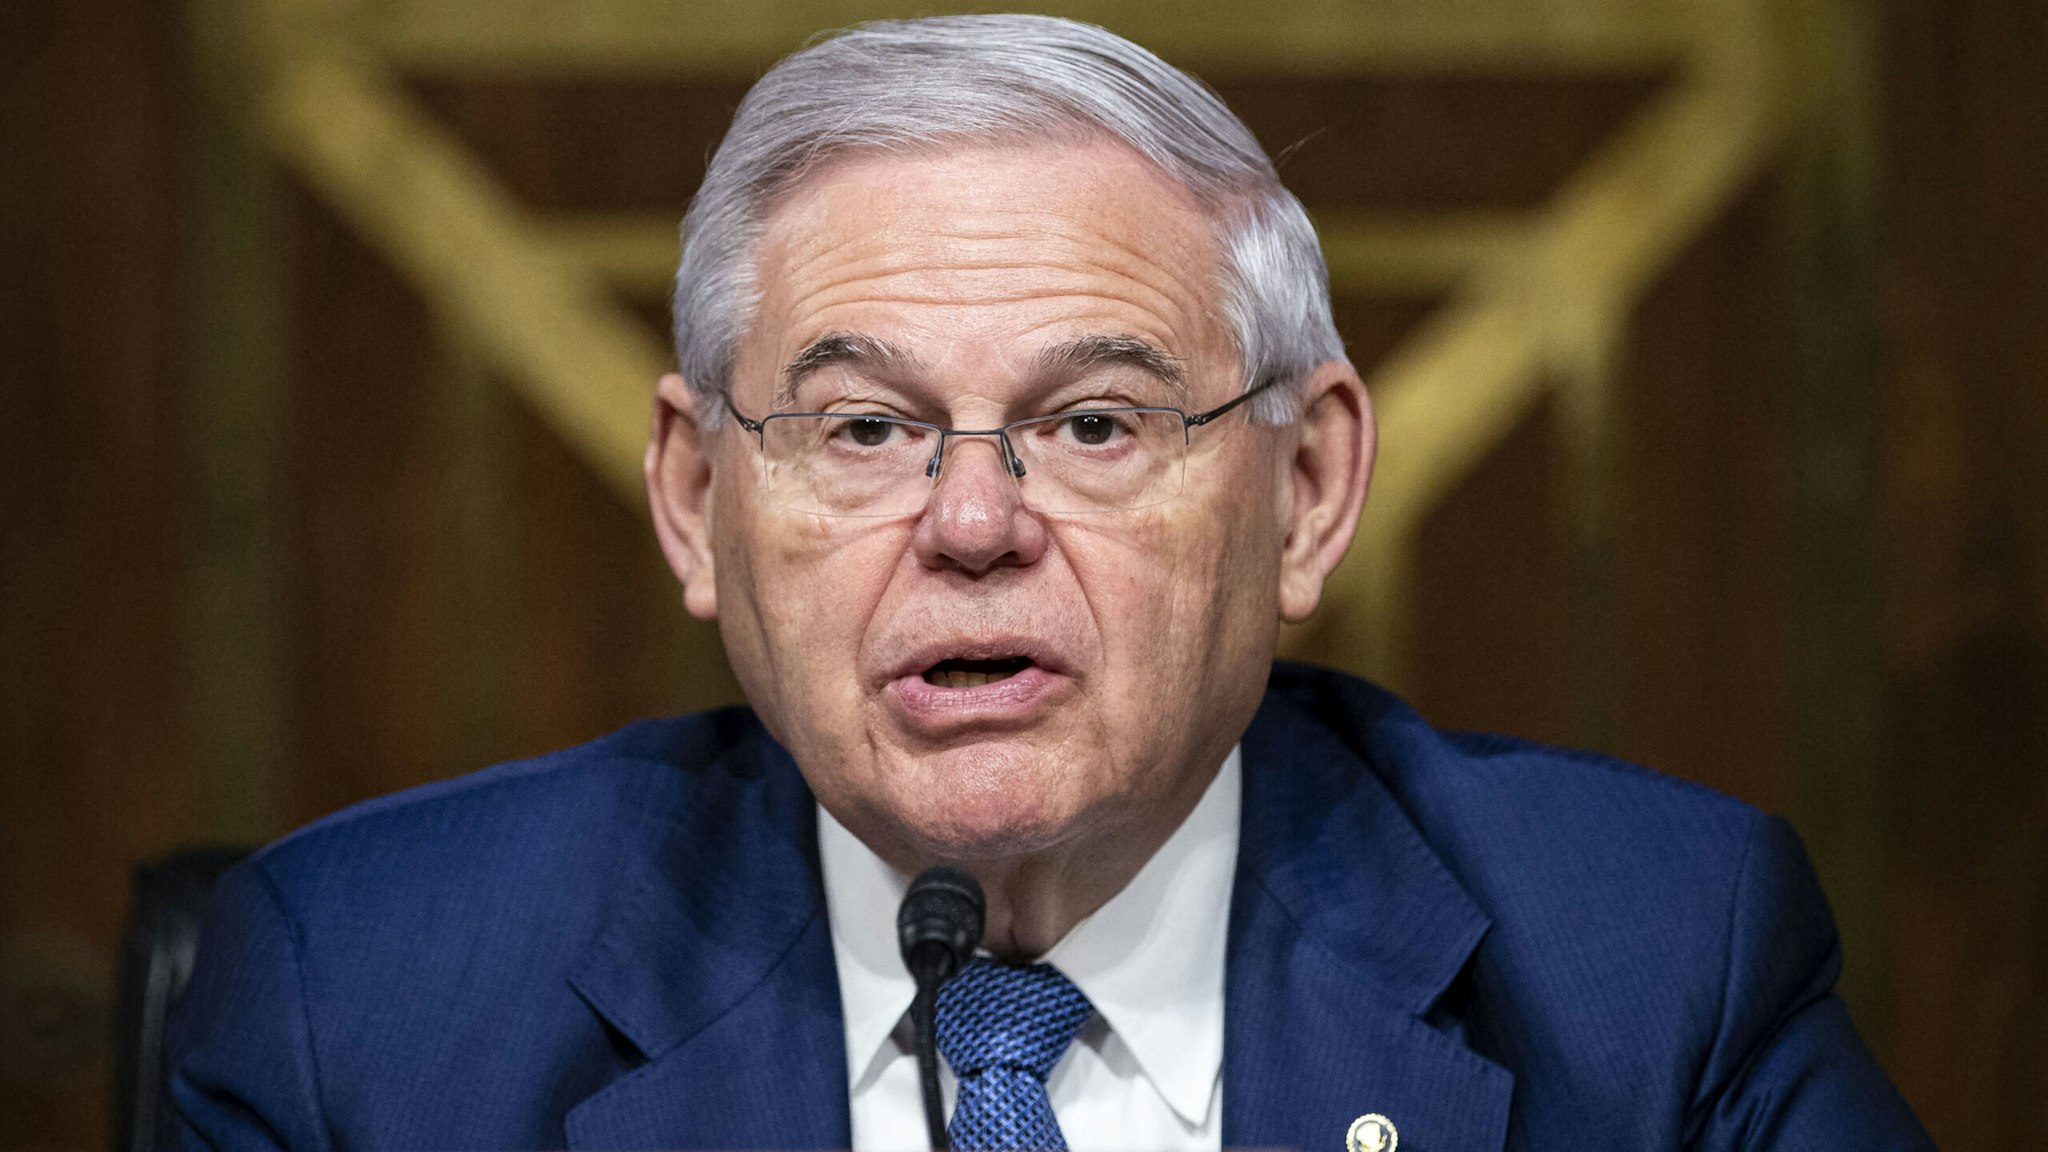 US Senator Robert Menendez, chairman of the Senate Foreign Relations Committee, speaks during a hearing on "Review of the FY2023 State Department Budget Request," in Washington, DC, on April 26, 2022.